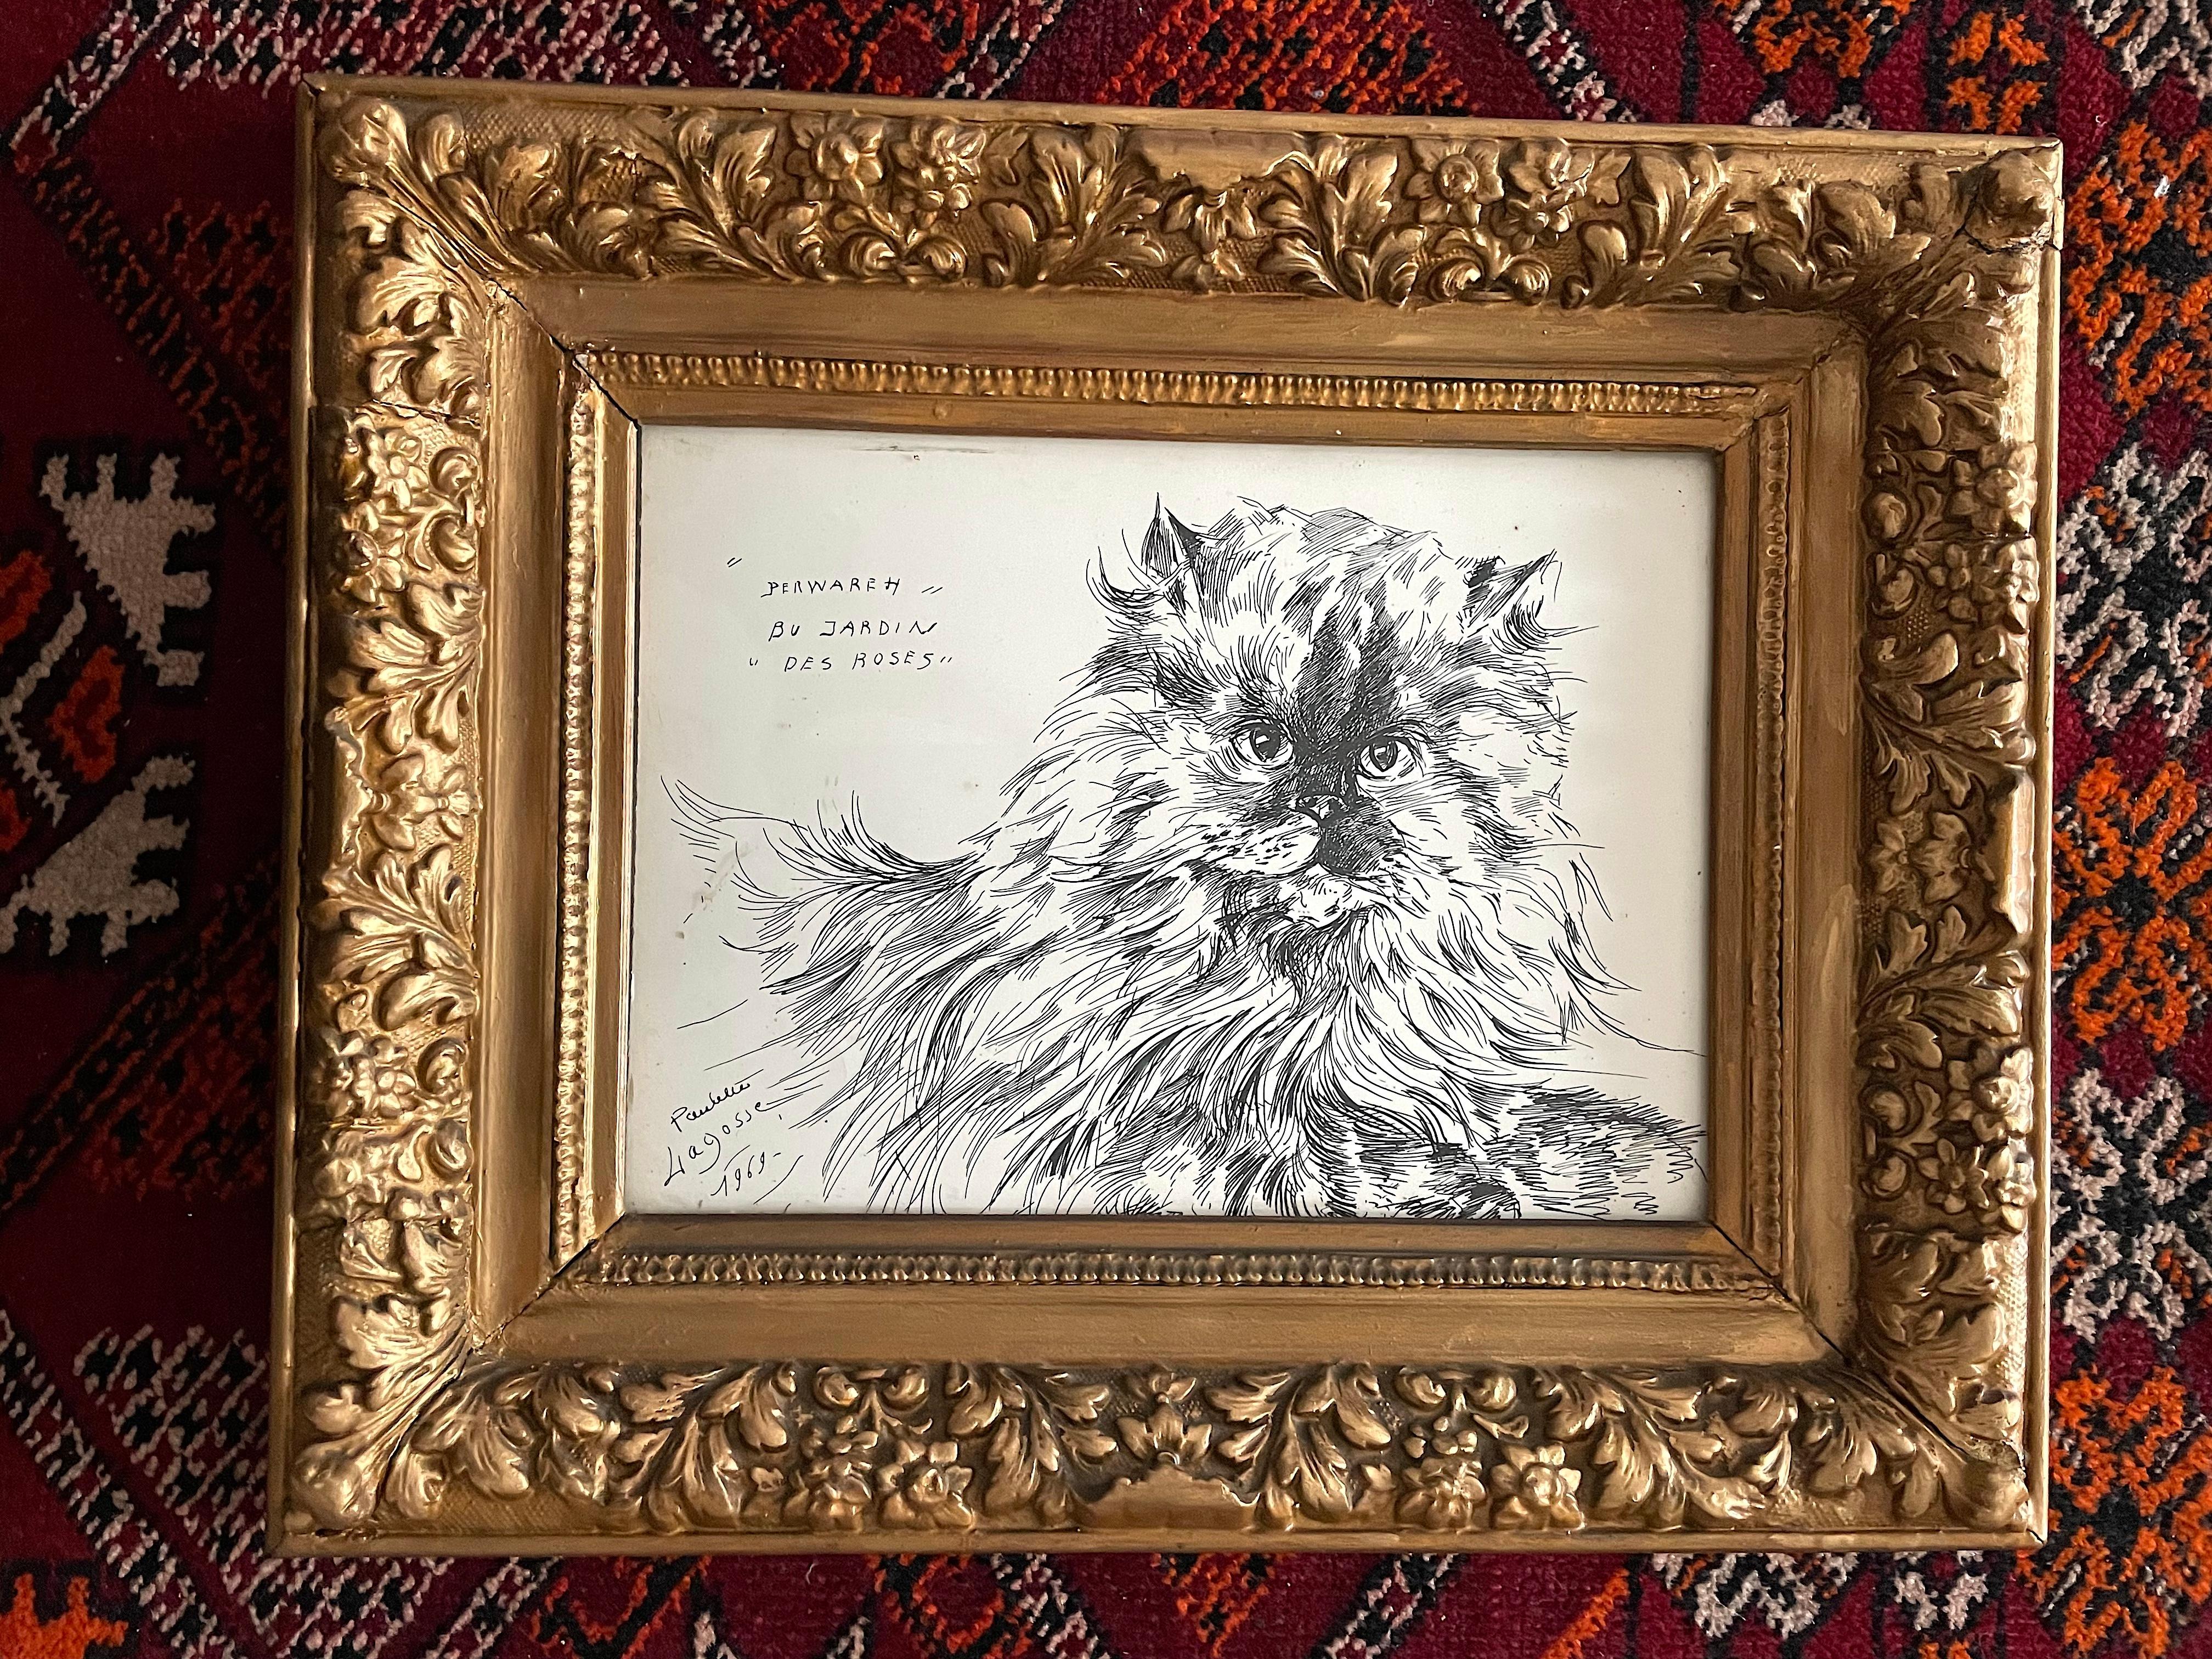 A mid-century ink painting of a cat by French artist Marie Paulette Lagosse (1921-1996) circa 1969 and its antique stucco frame. The picture is protected by a glass frame.